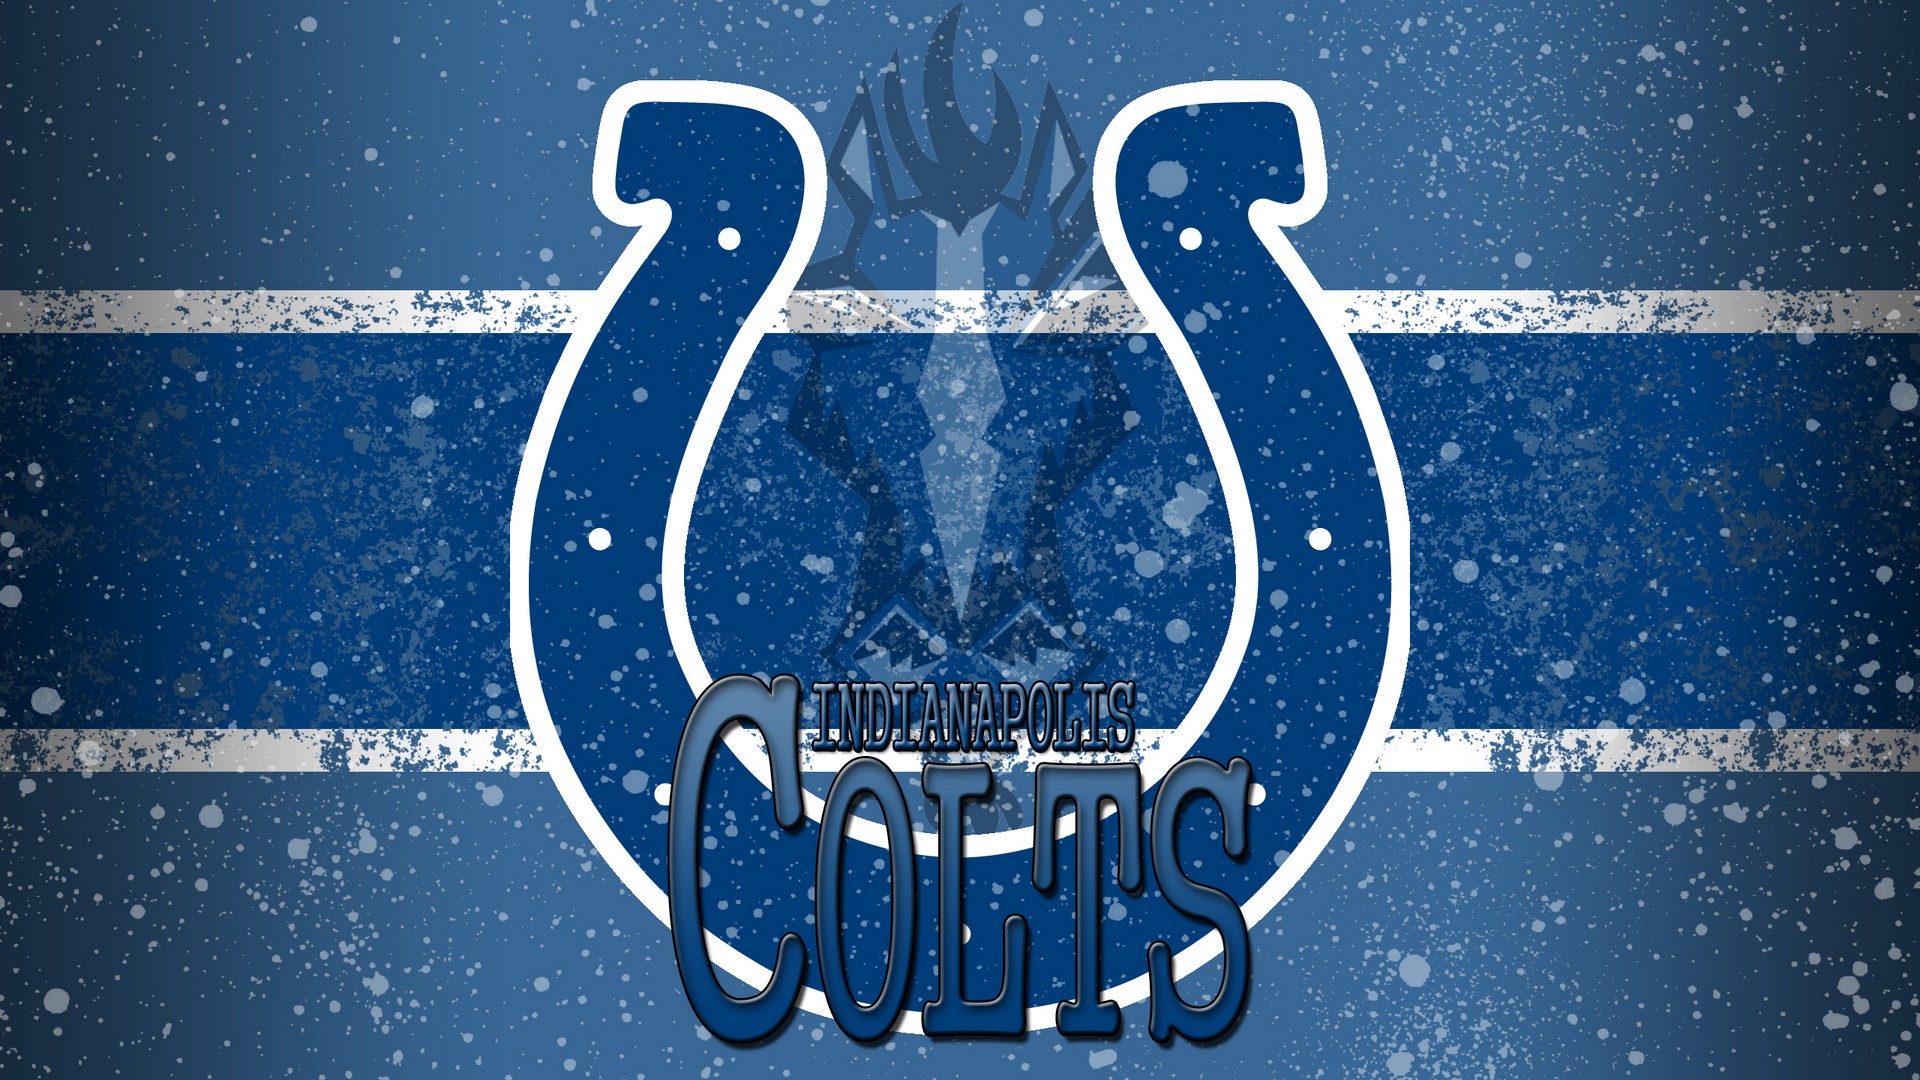 Indianapolis Colts Wallpaper for Computer With high-resolution 1920X1080 pixel. Download and set as wallpaper for Desktop Computer, Apple iPhone X, XS Max, XR, 8, 7, 6, SE, iPad, Android